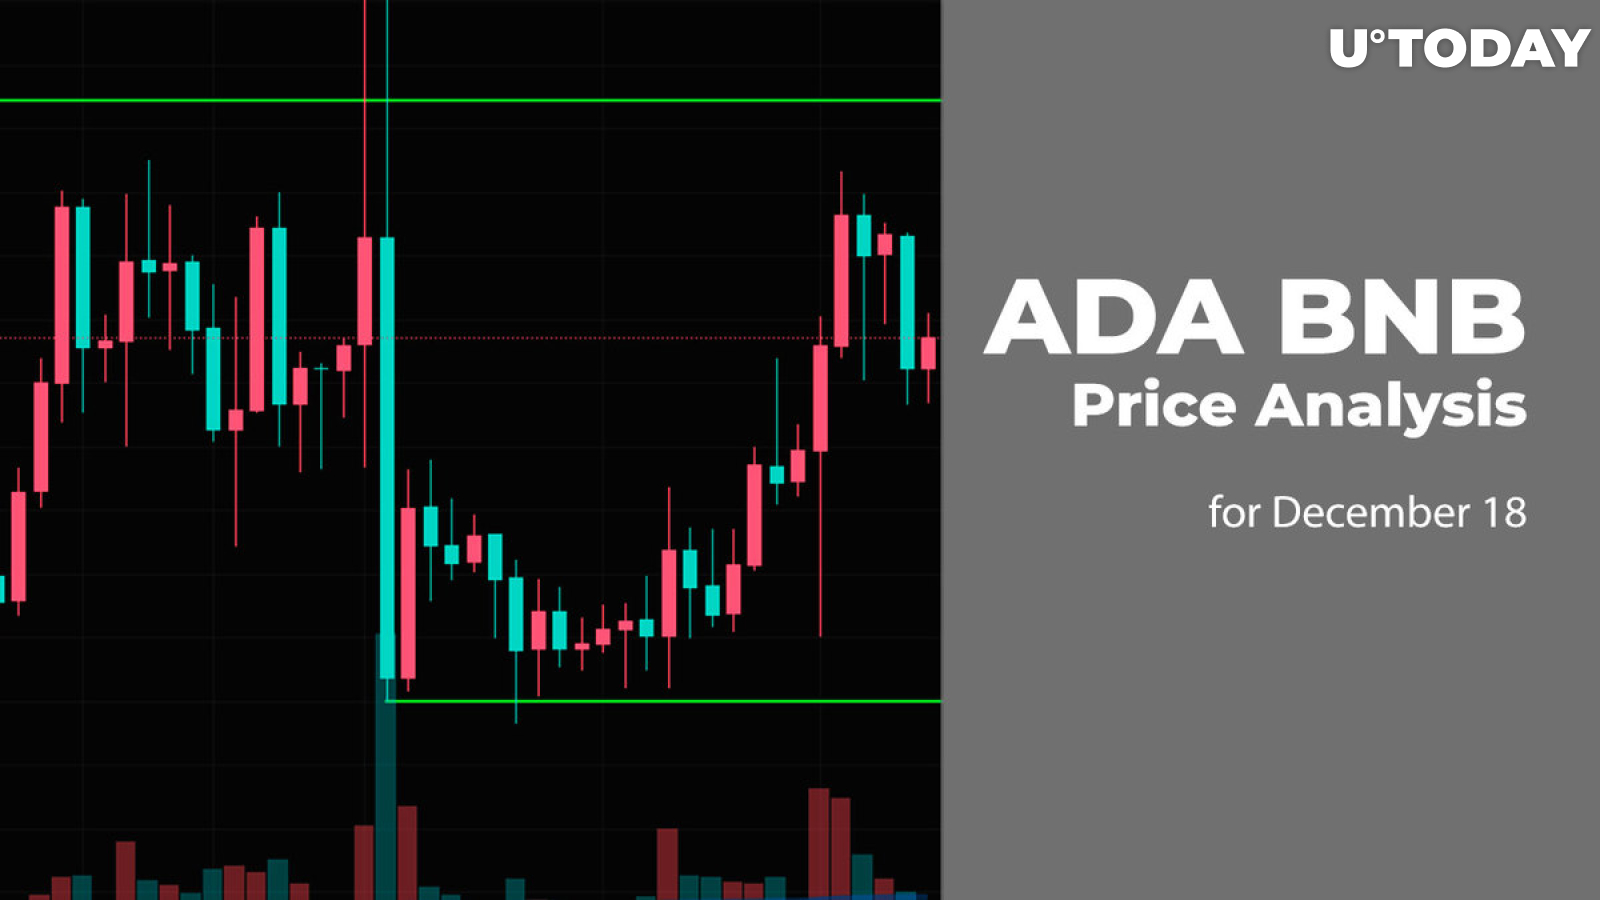 ADA and BNB Price Analysis for December 18